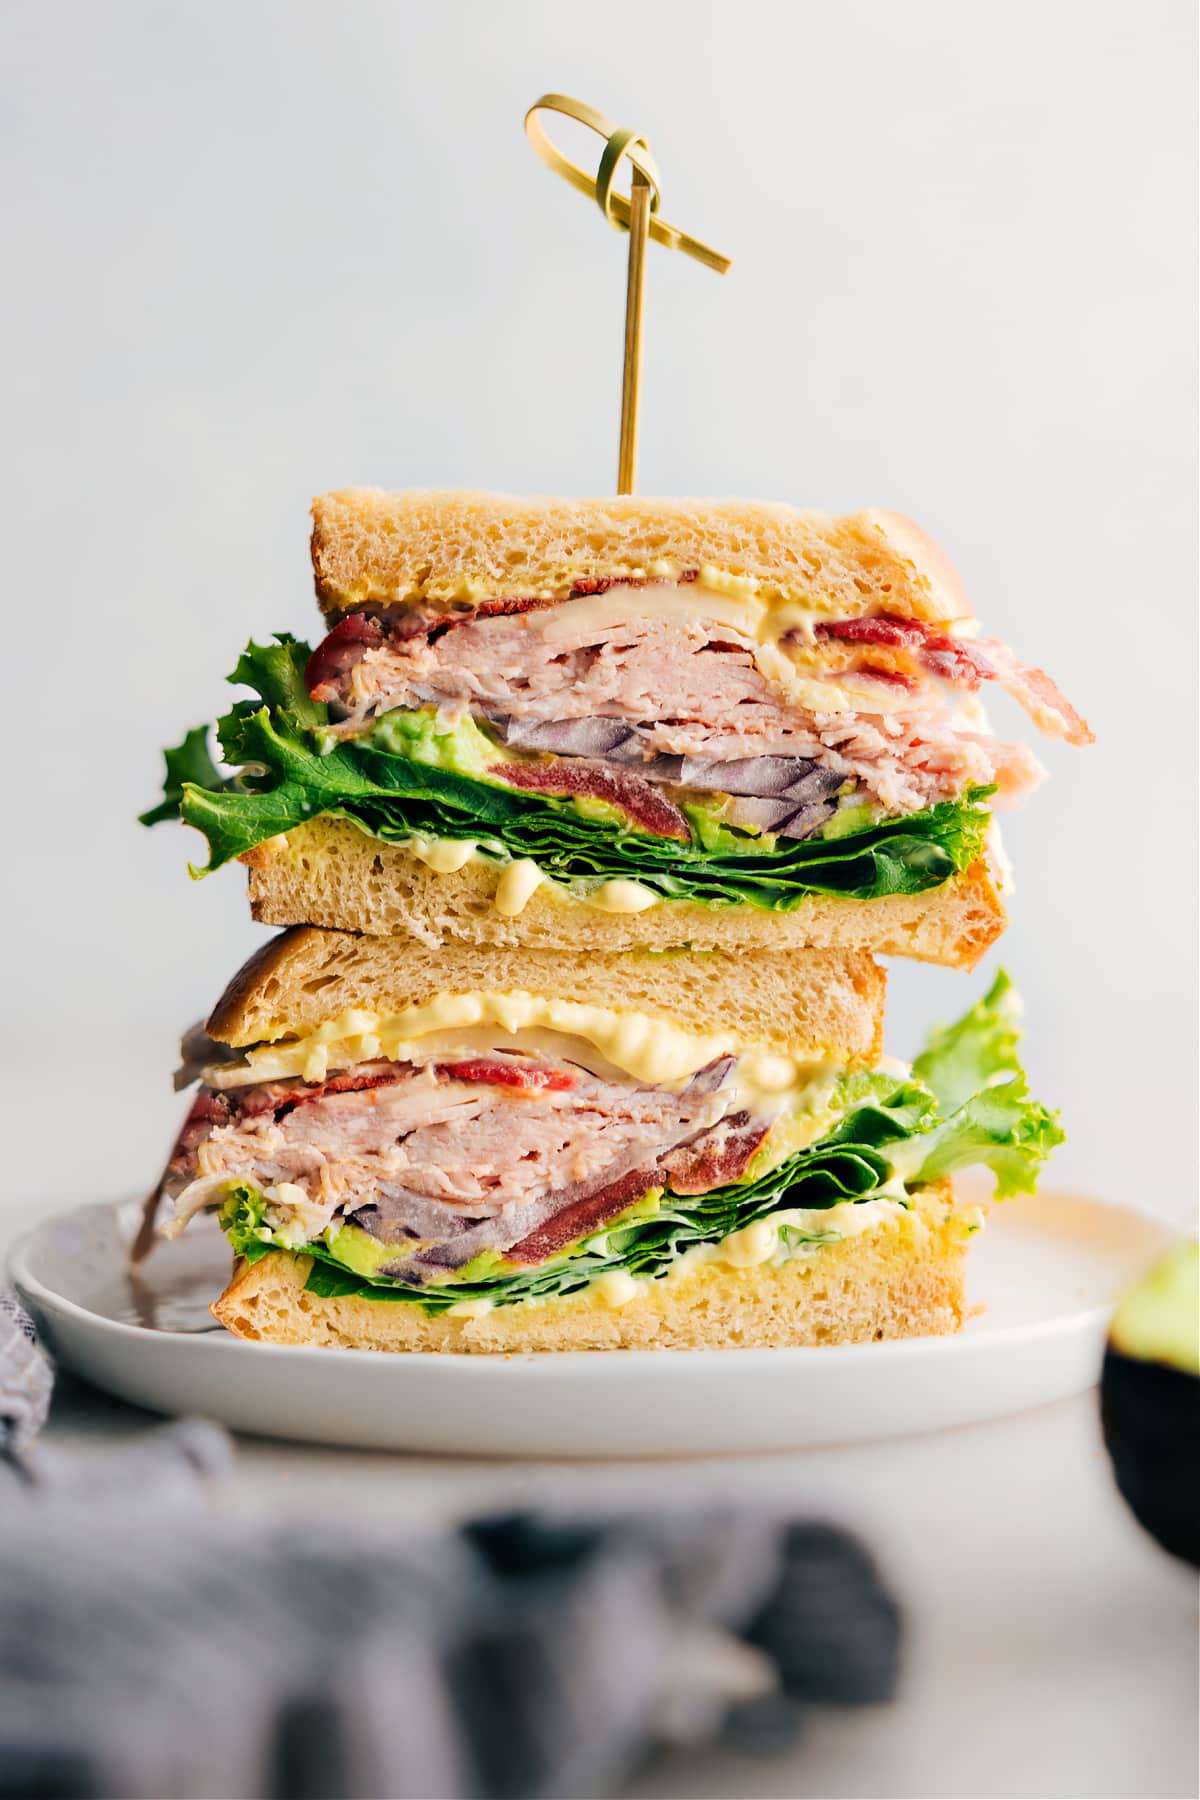 A thick and flavor-packed turkey bacon avocado sandwich made with delicious Thanksgiving leftovers, fresh vegetables, and a savory sauce.